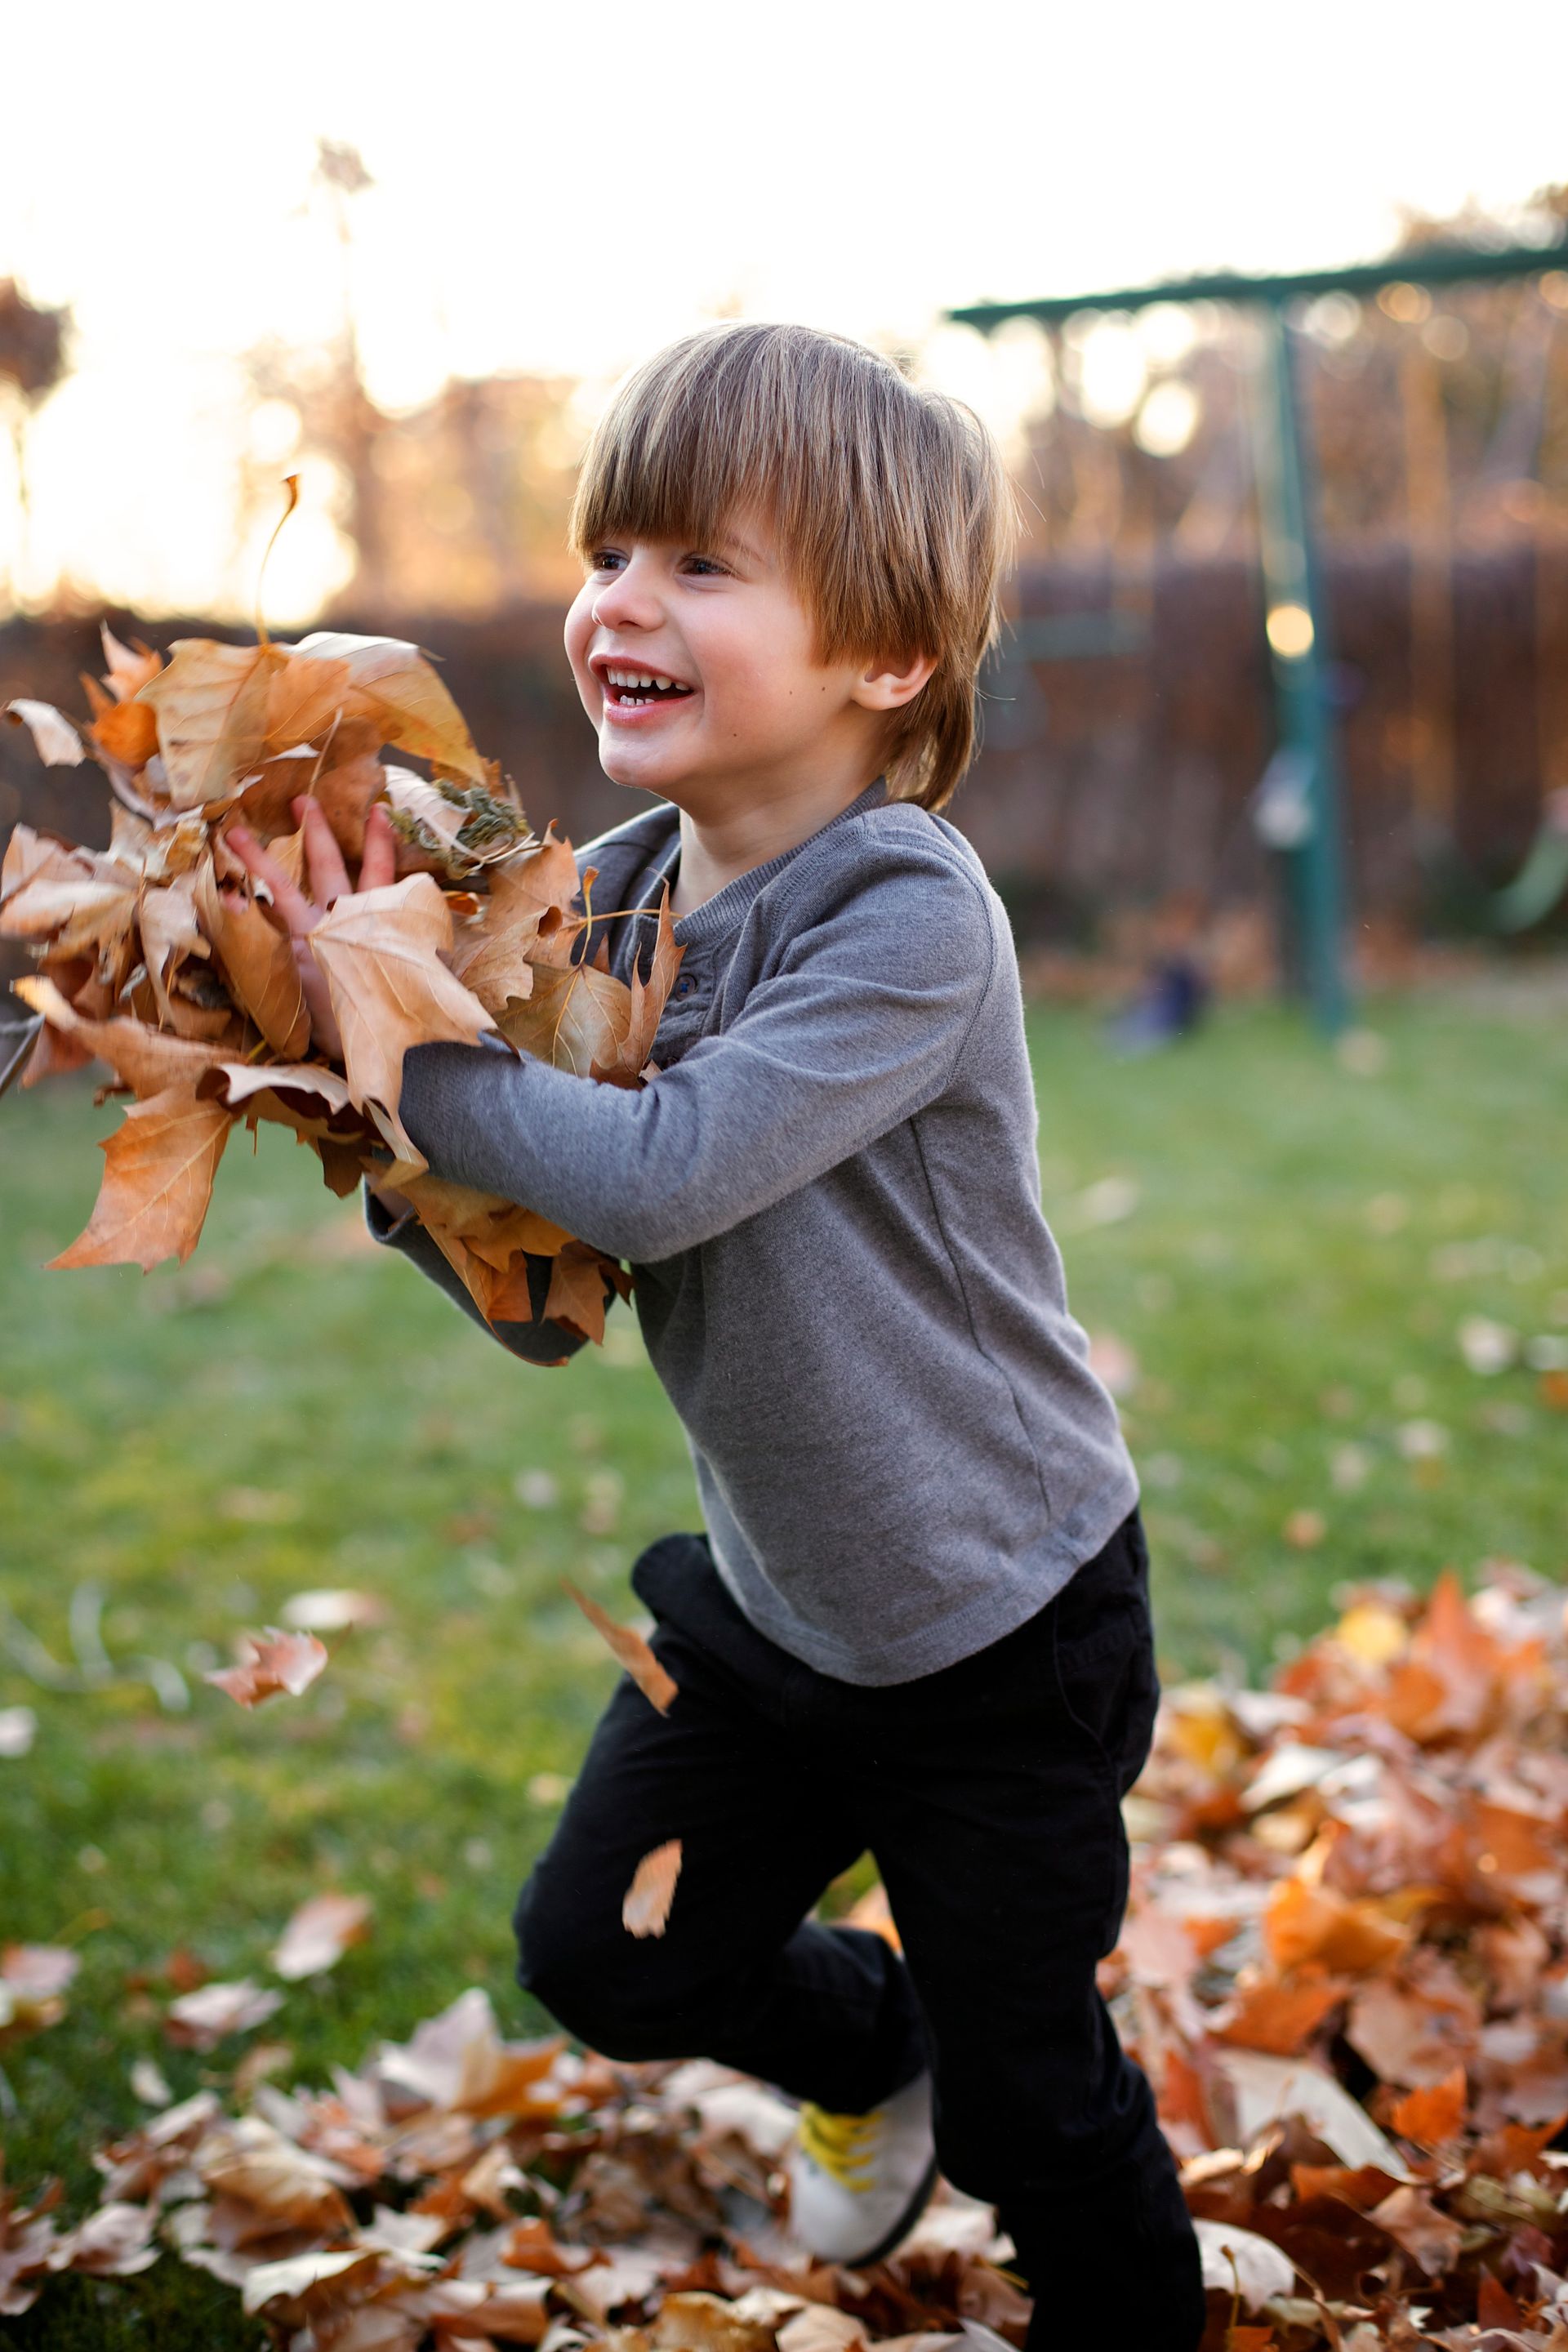 A young boy playing and running with a pile of leaves in his hands.